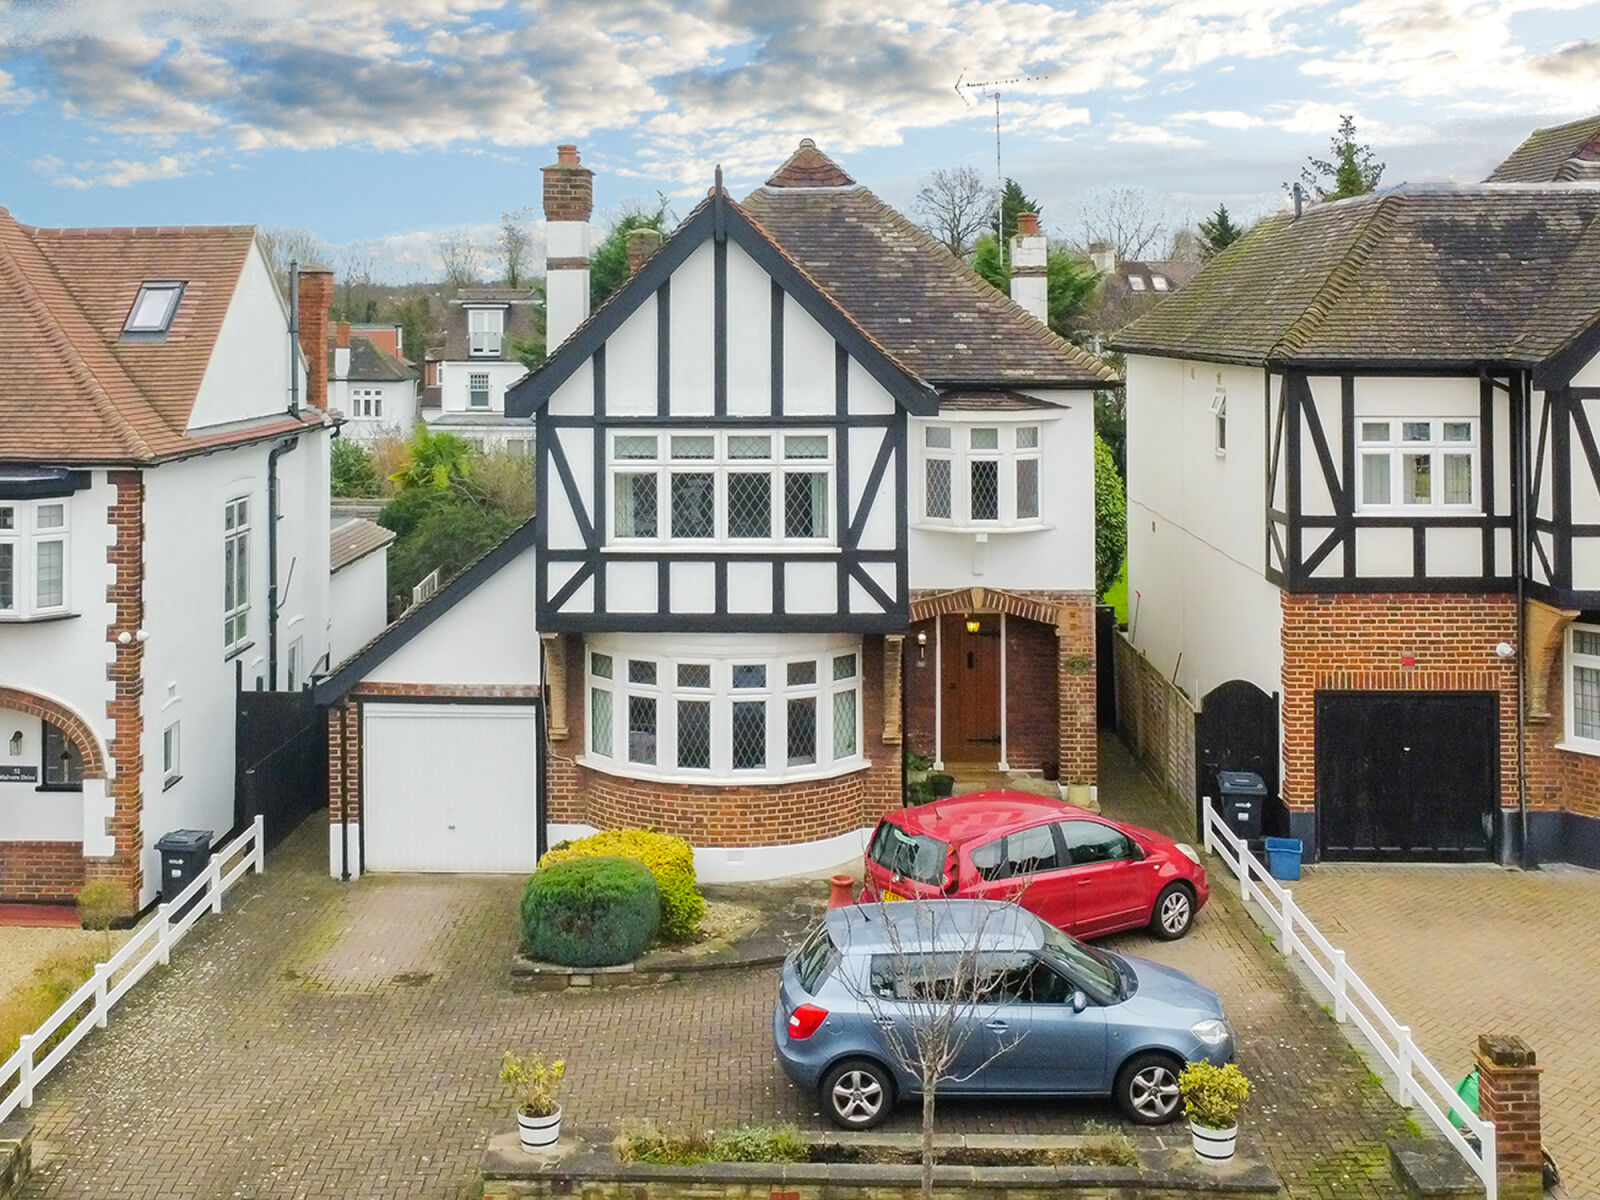 3 bedroom detached house for sale Malvern Drive, Woodford Green, IG8, main image